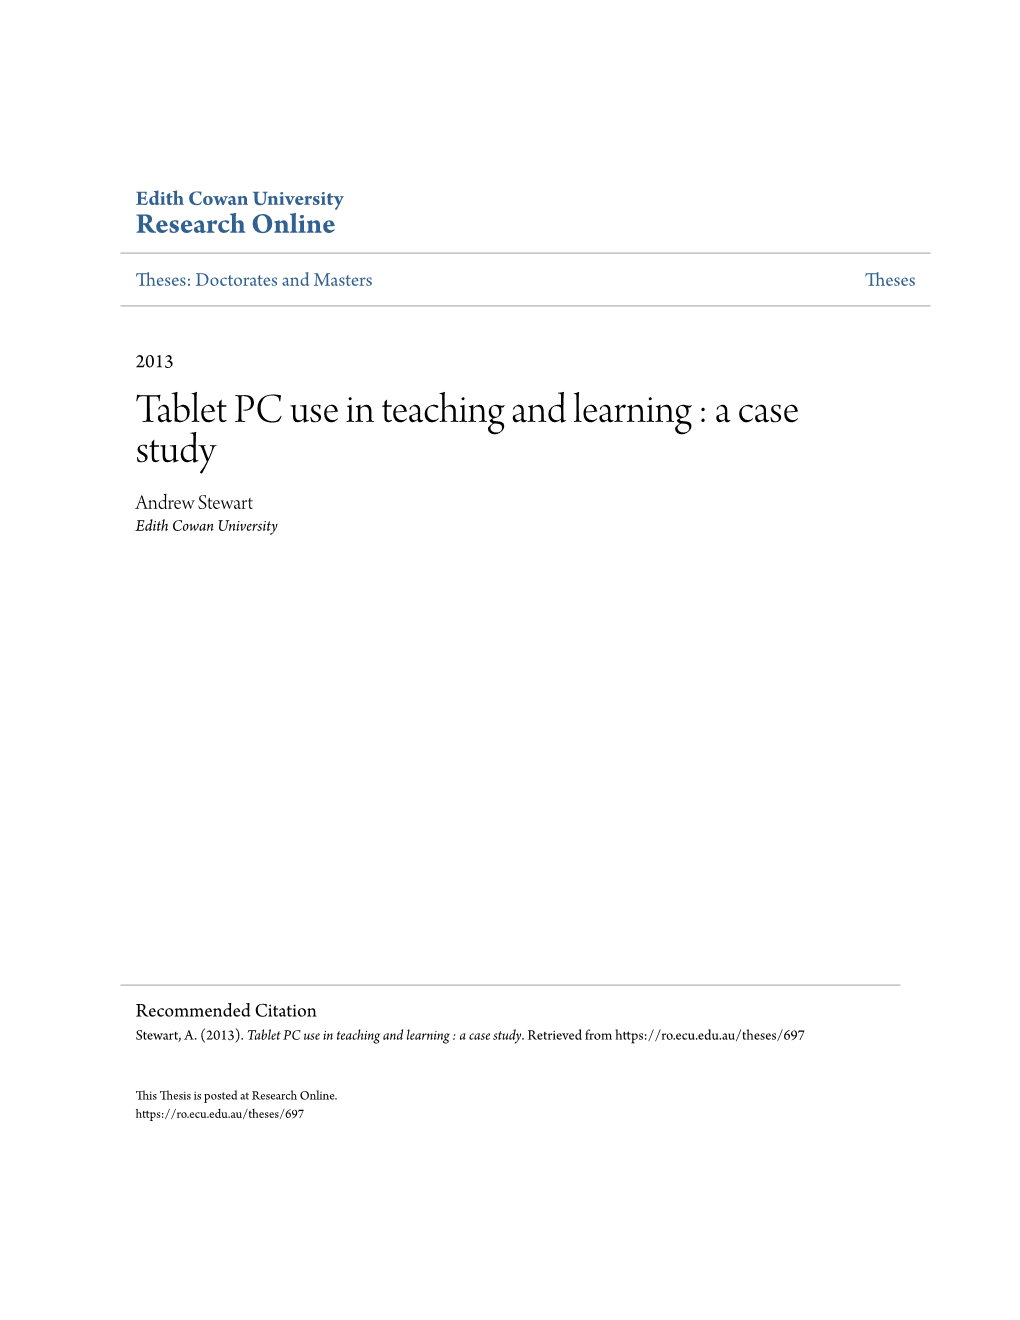 Tablet PC Use in Teaching and Learning : a Case Study Andrew Stewart Edith Cowan University